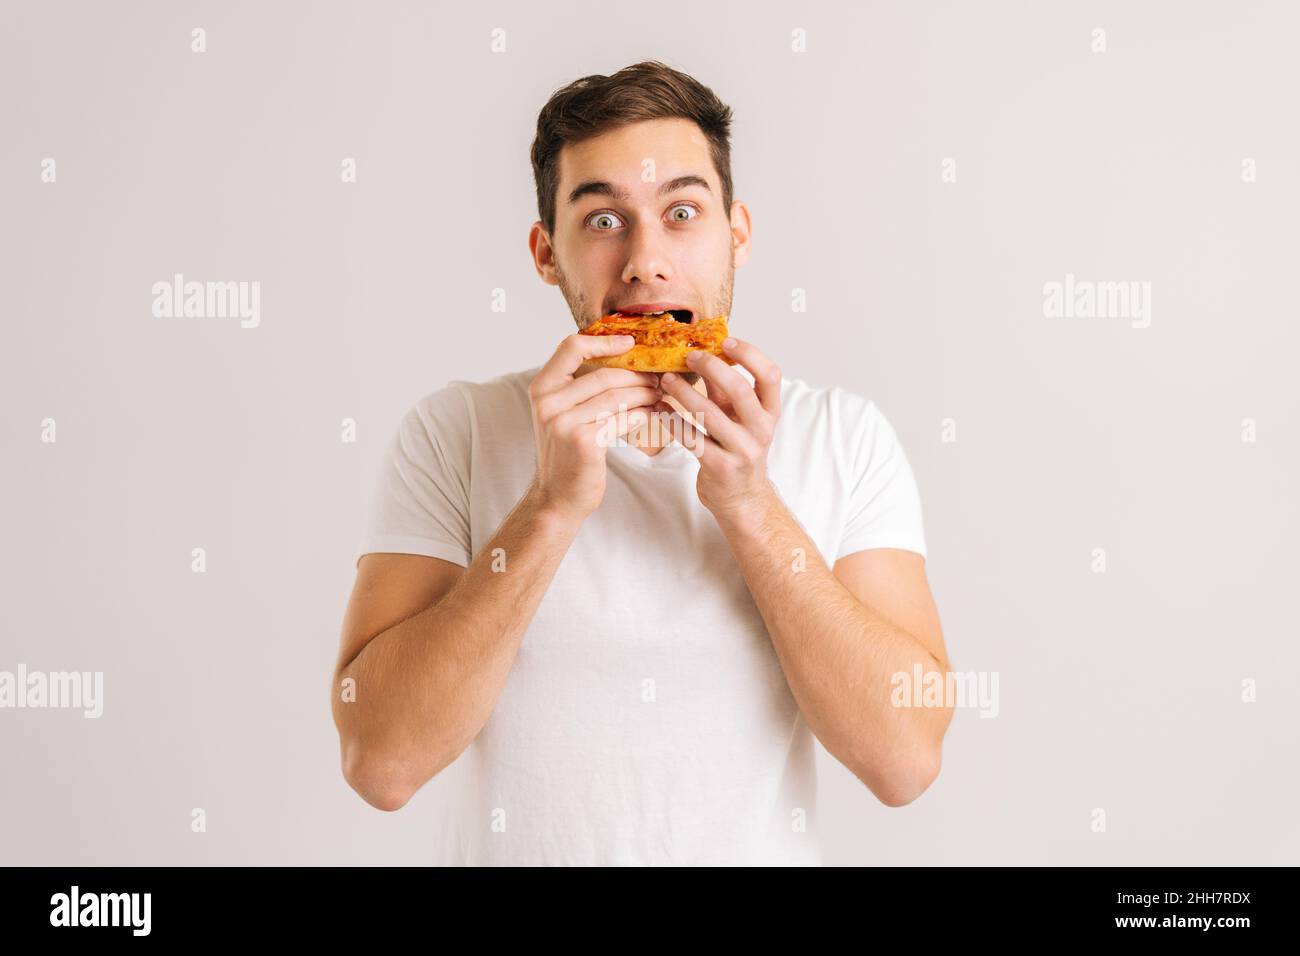 Portrait of exctited young man bitting delicious slice of pizza looking at camera on white isolated background. Stock Photo